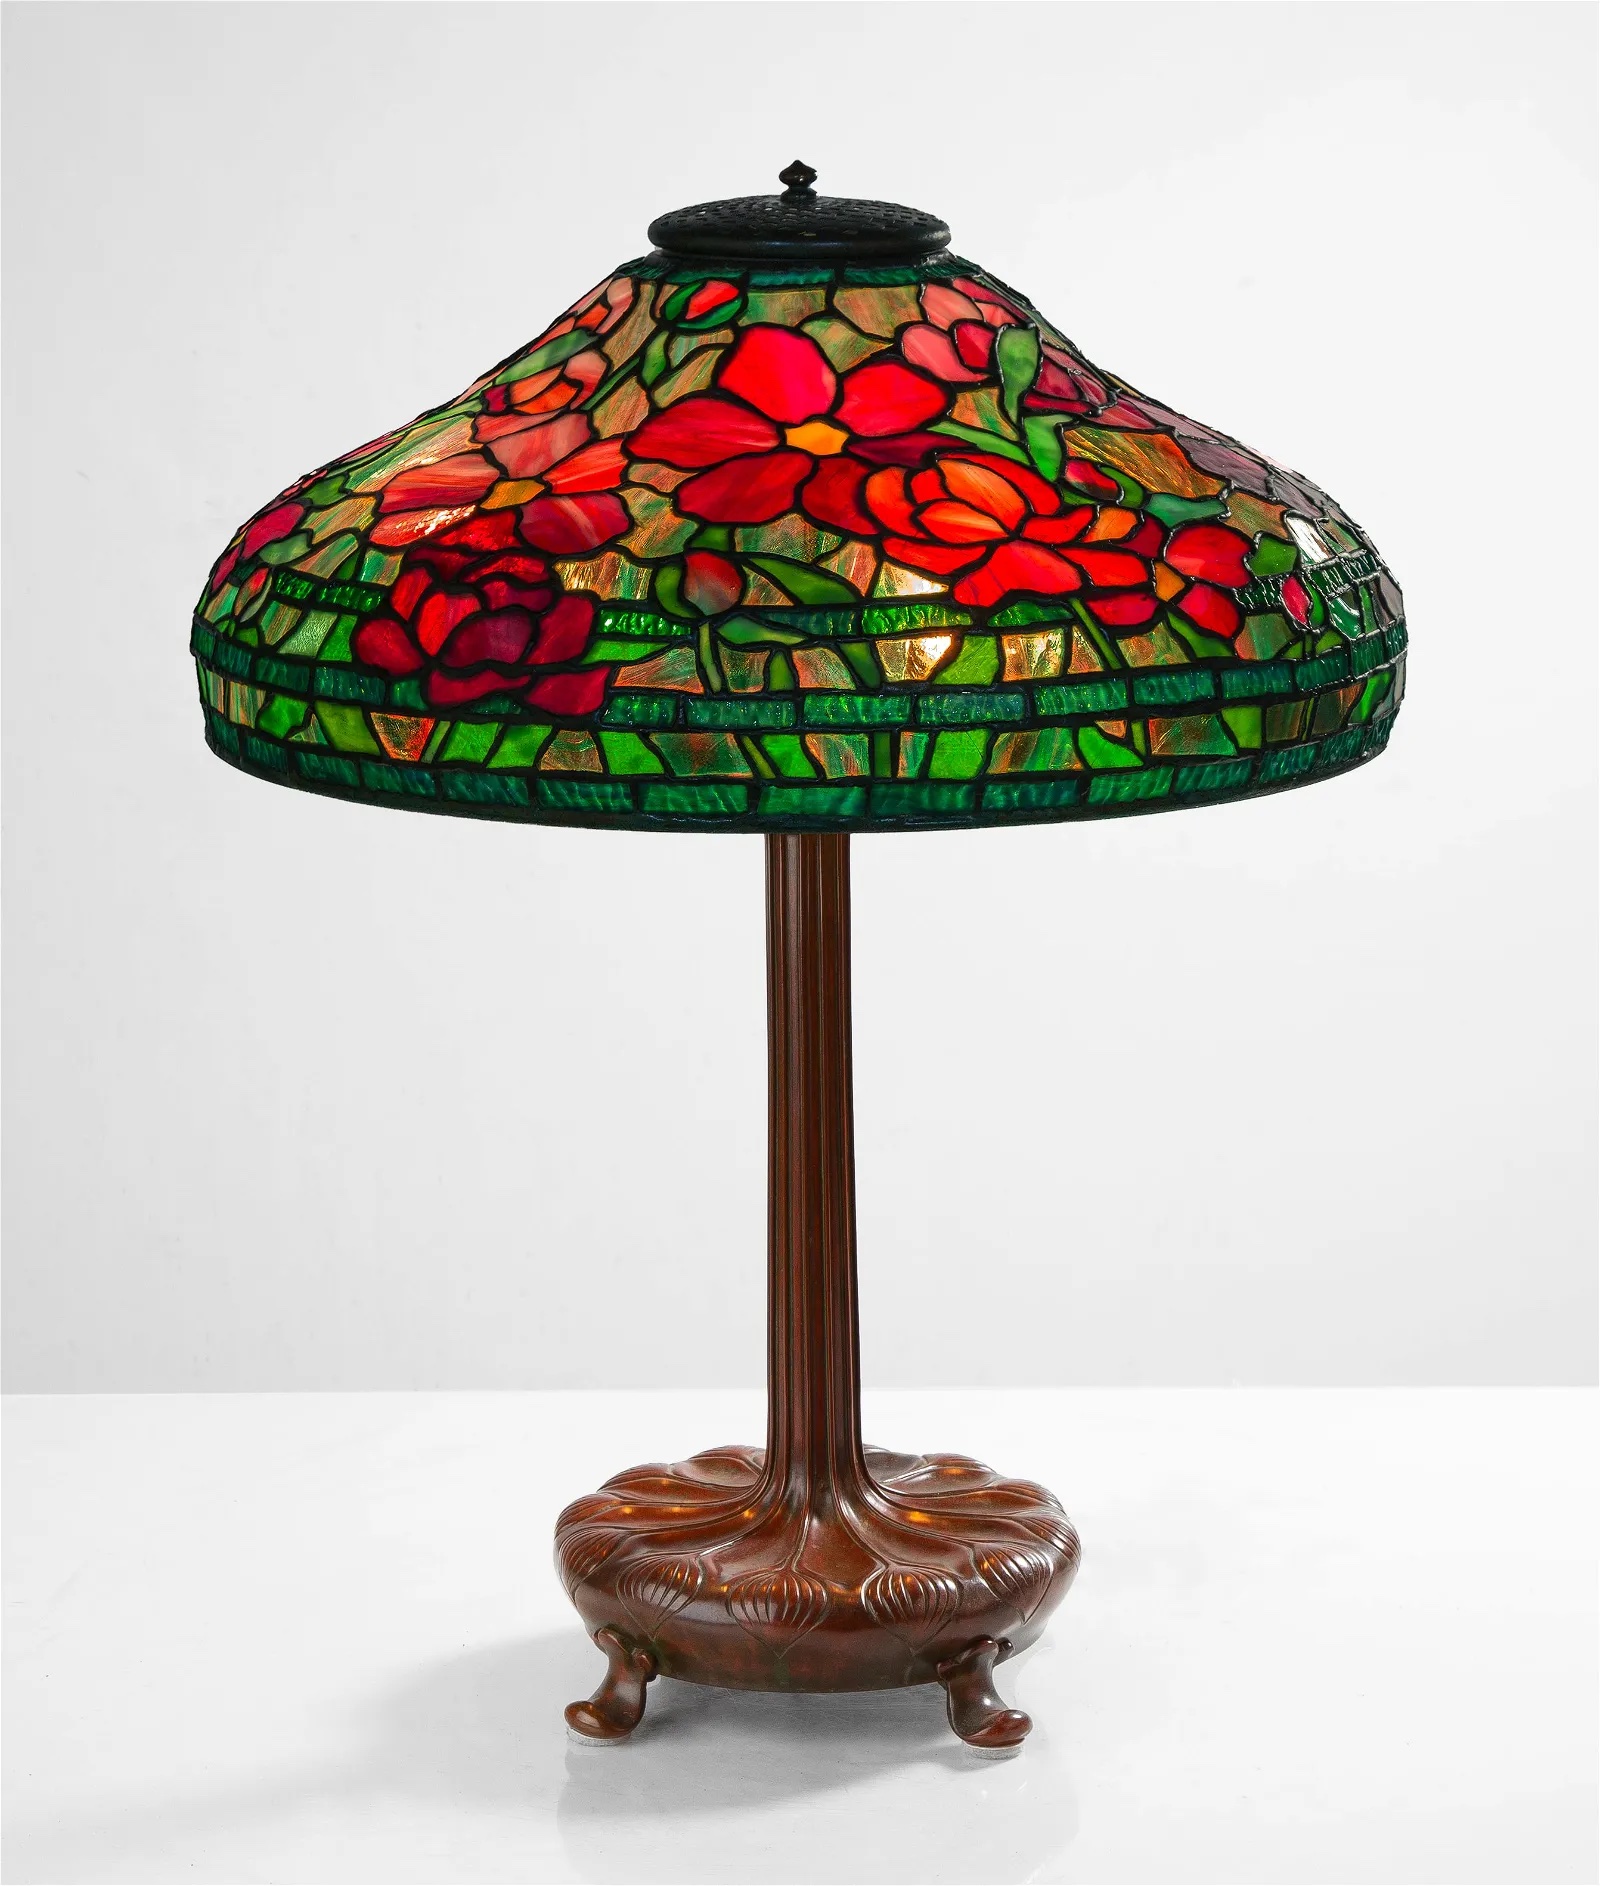 Tiffany Studios Peony lamp, estimated at $60,000-$90,000 at Cottone Auctions.
